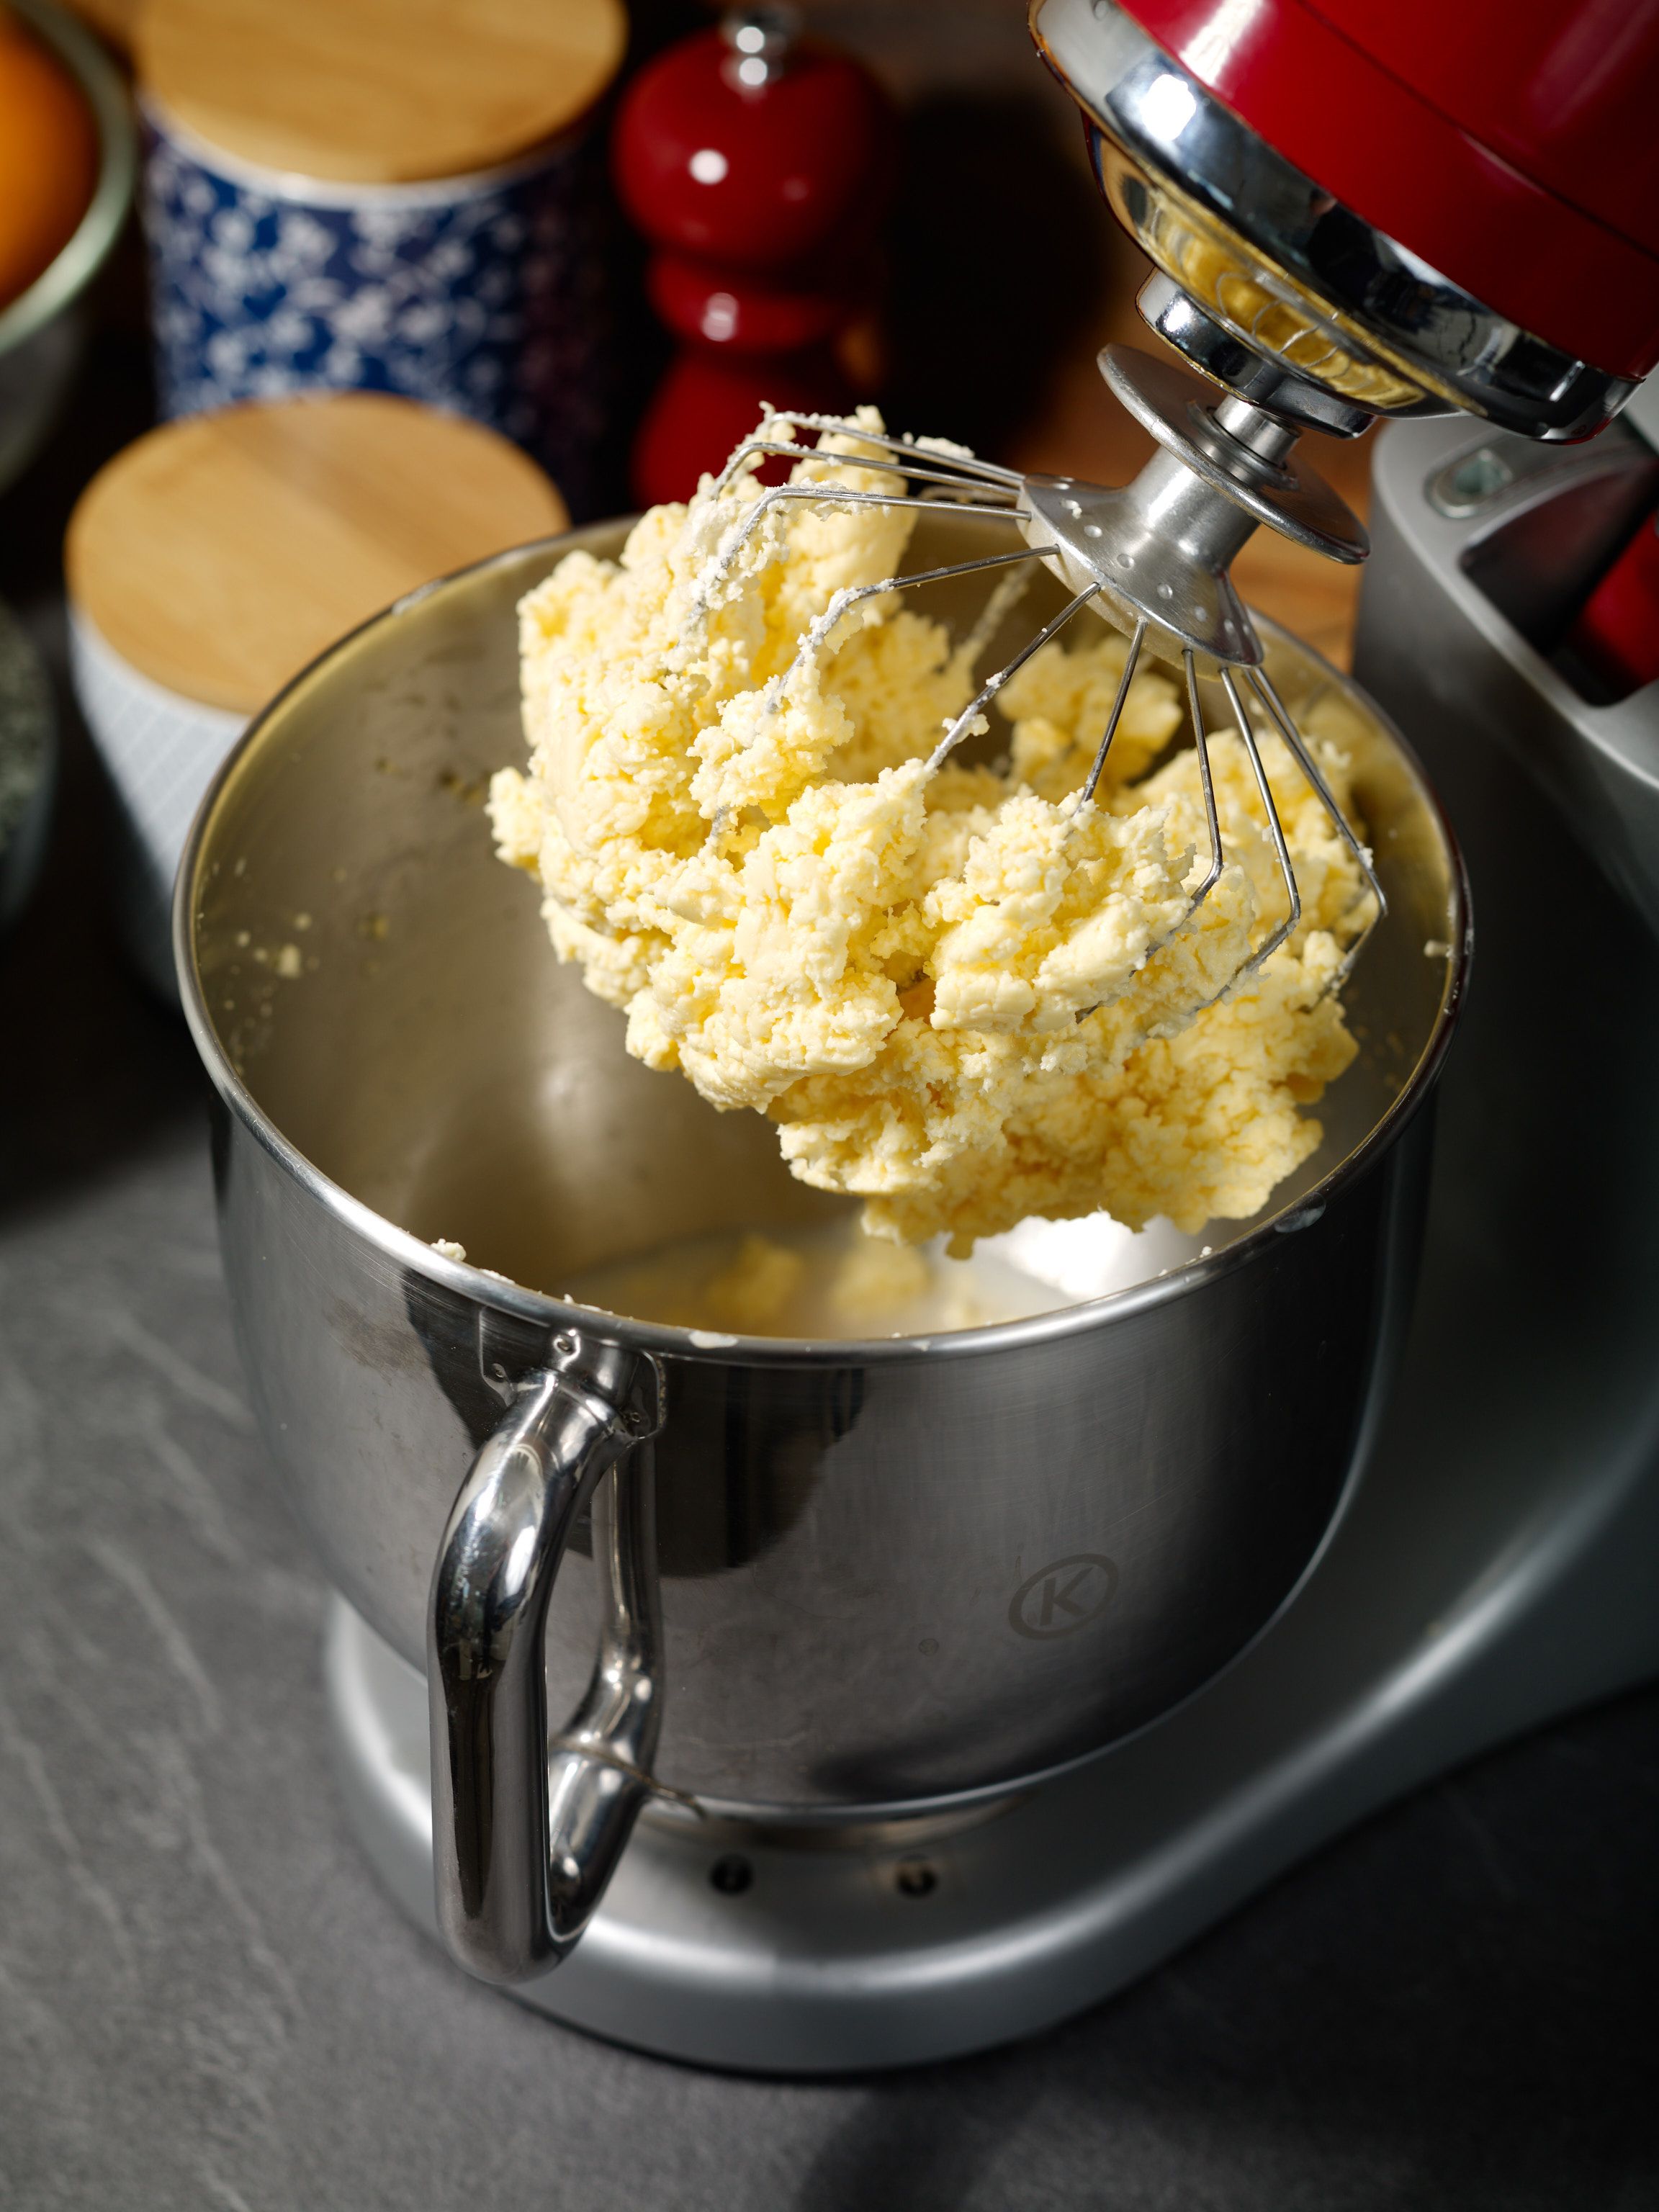 Fully churned but unwashed butter as well as buttermilk left in the mixing pot